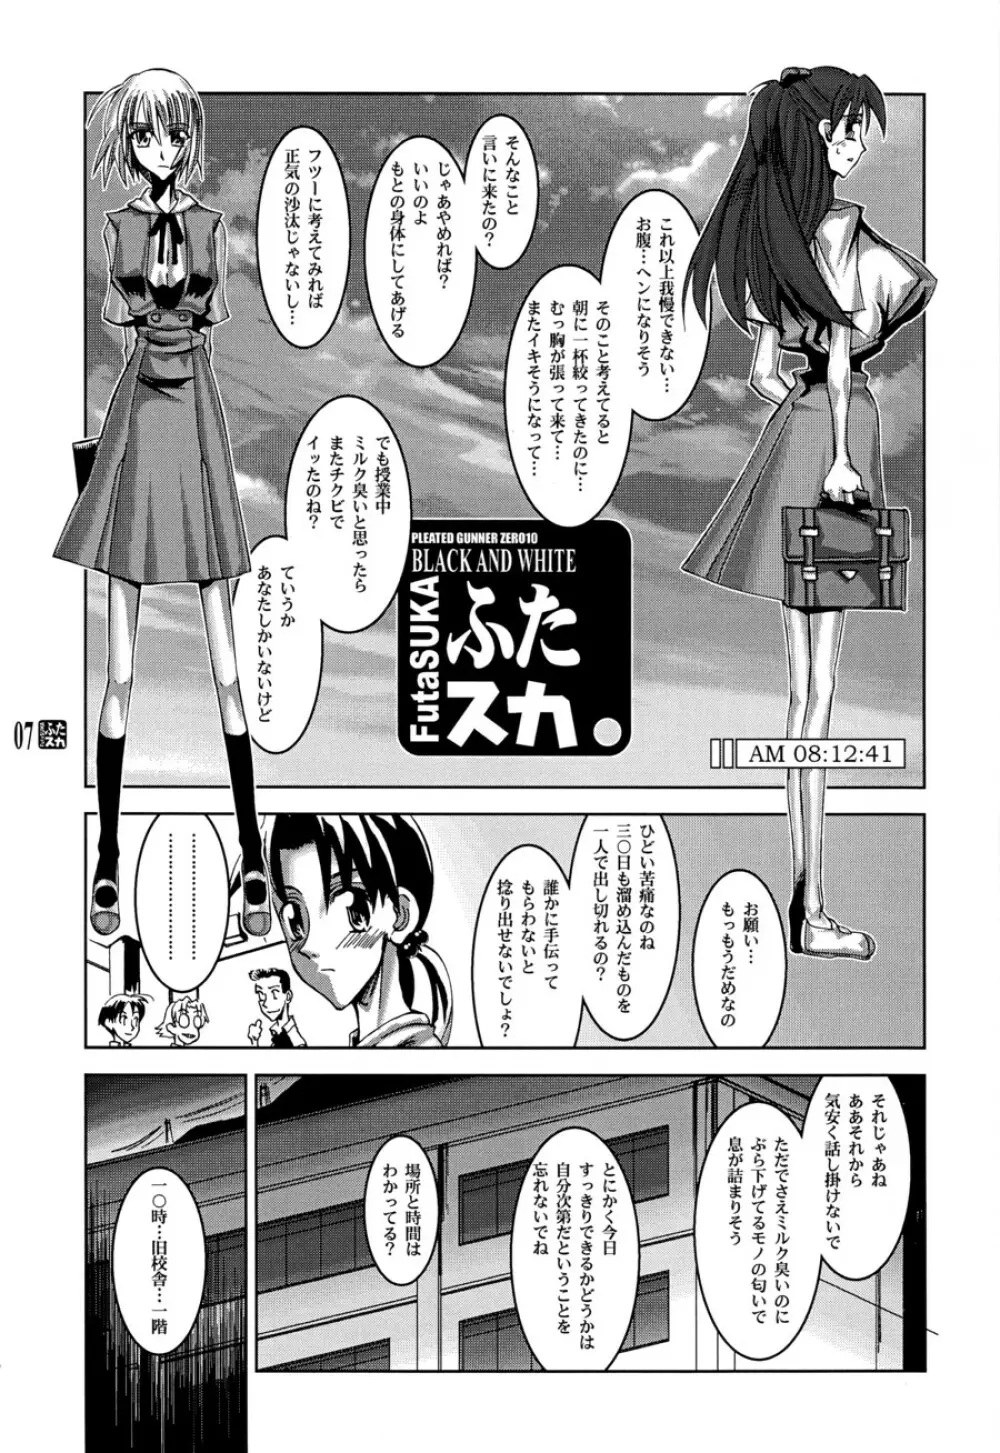 PLEATED GUNNER #10 BLACK AND WHITE ふたスカ Page.6